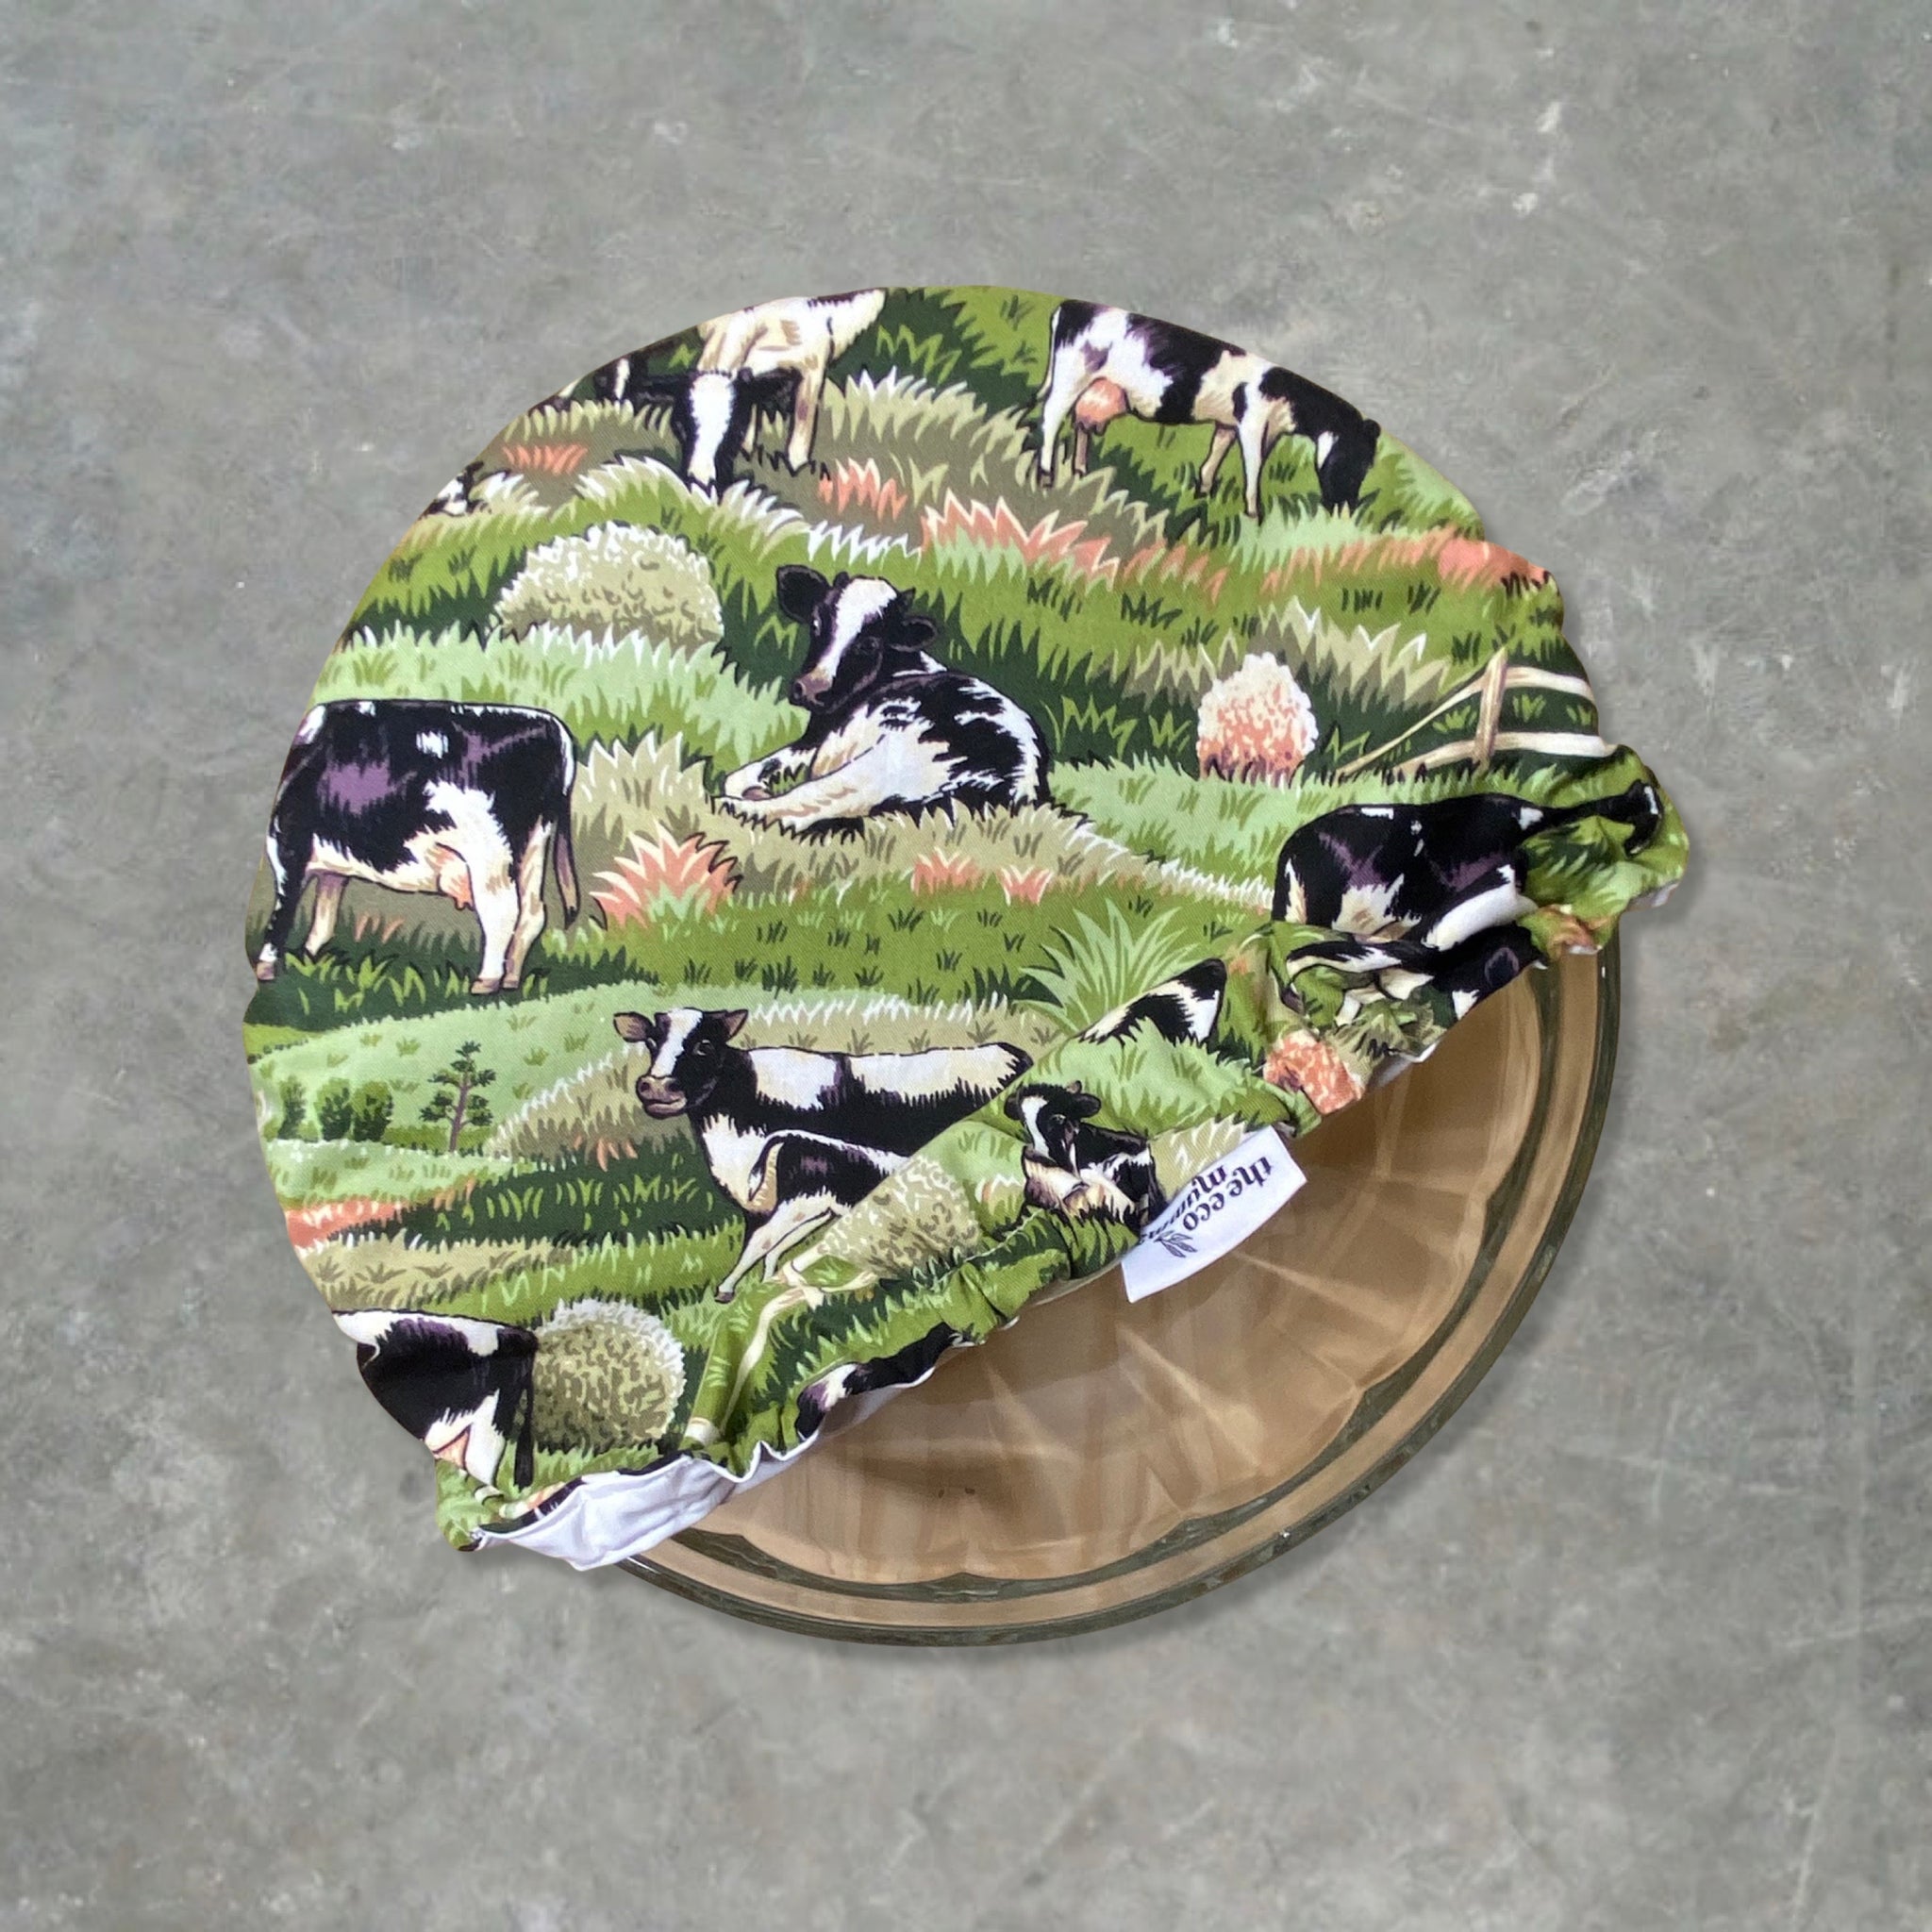 Dairy Cow Salad Bowl Cover